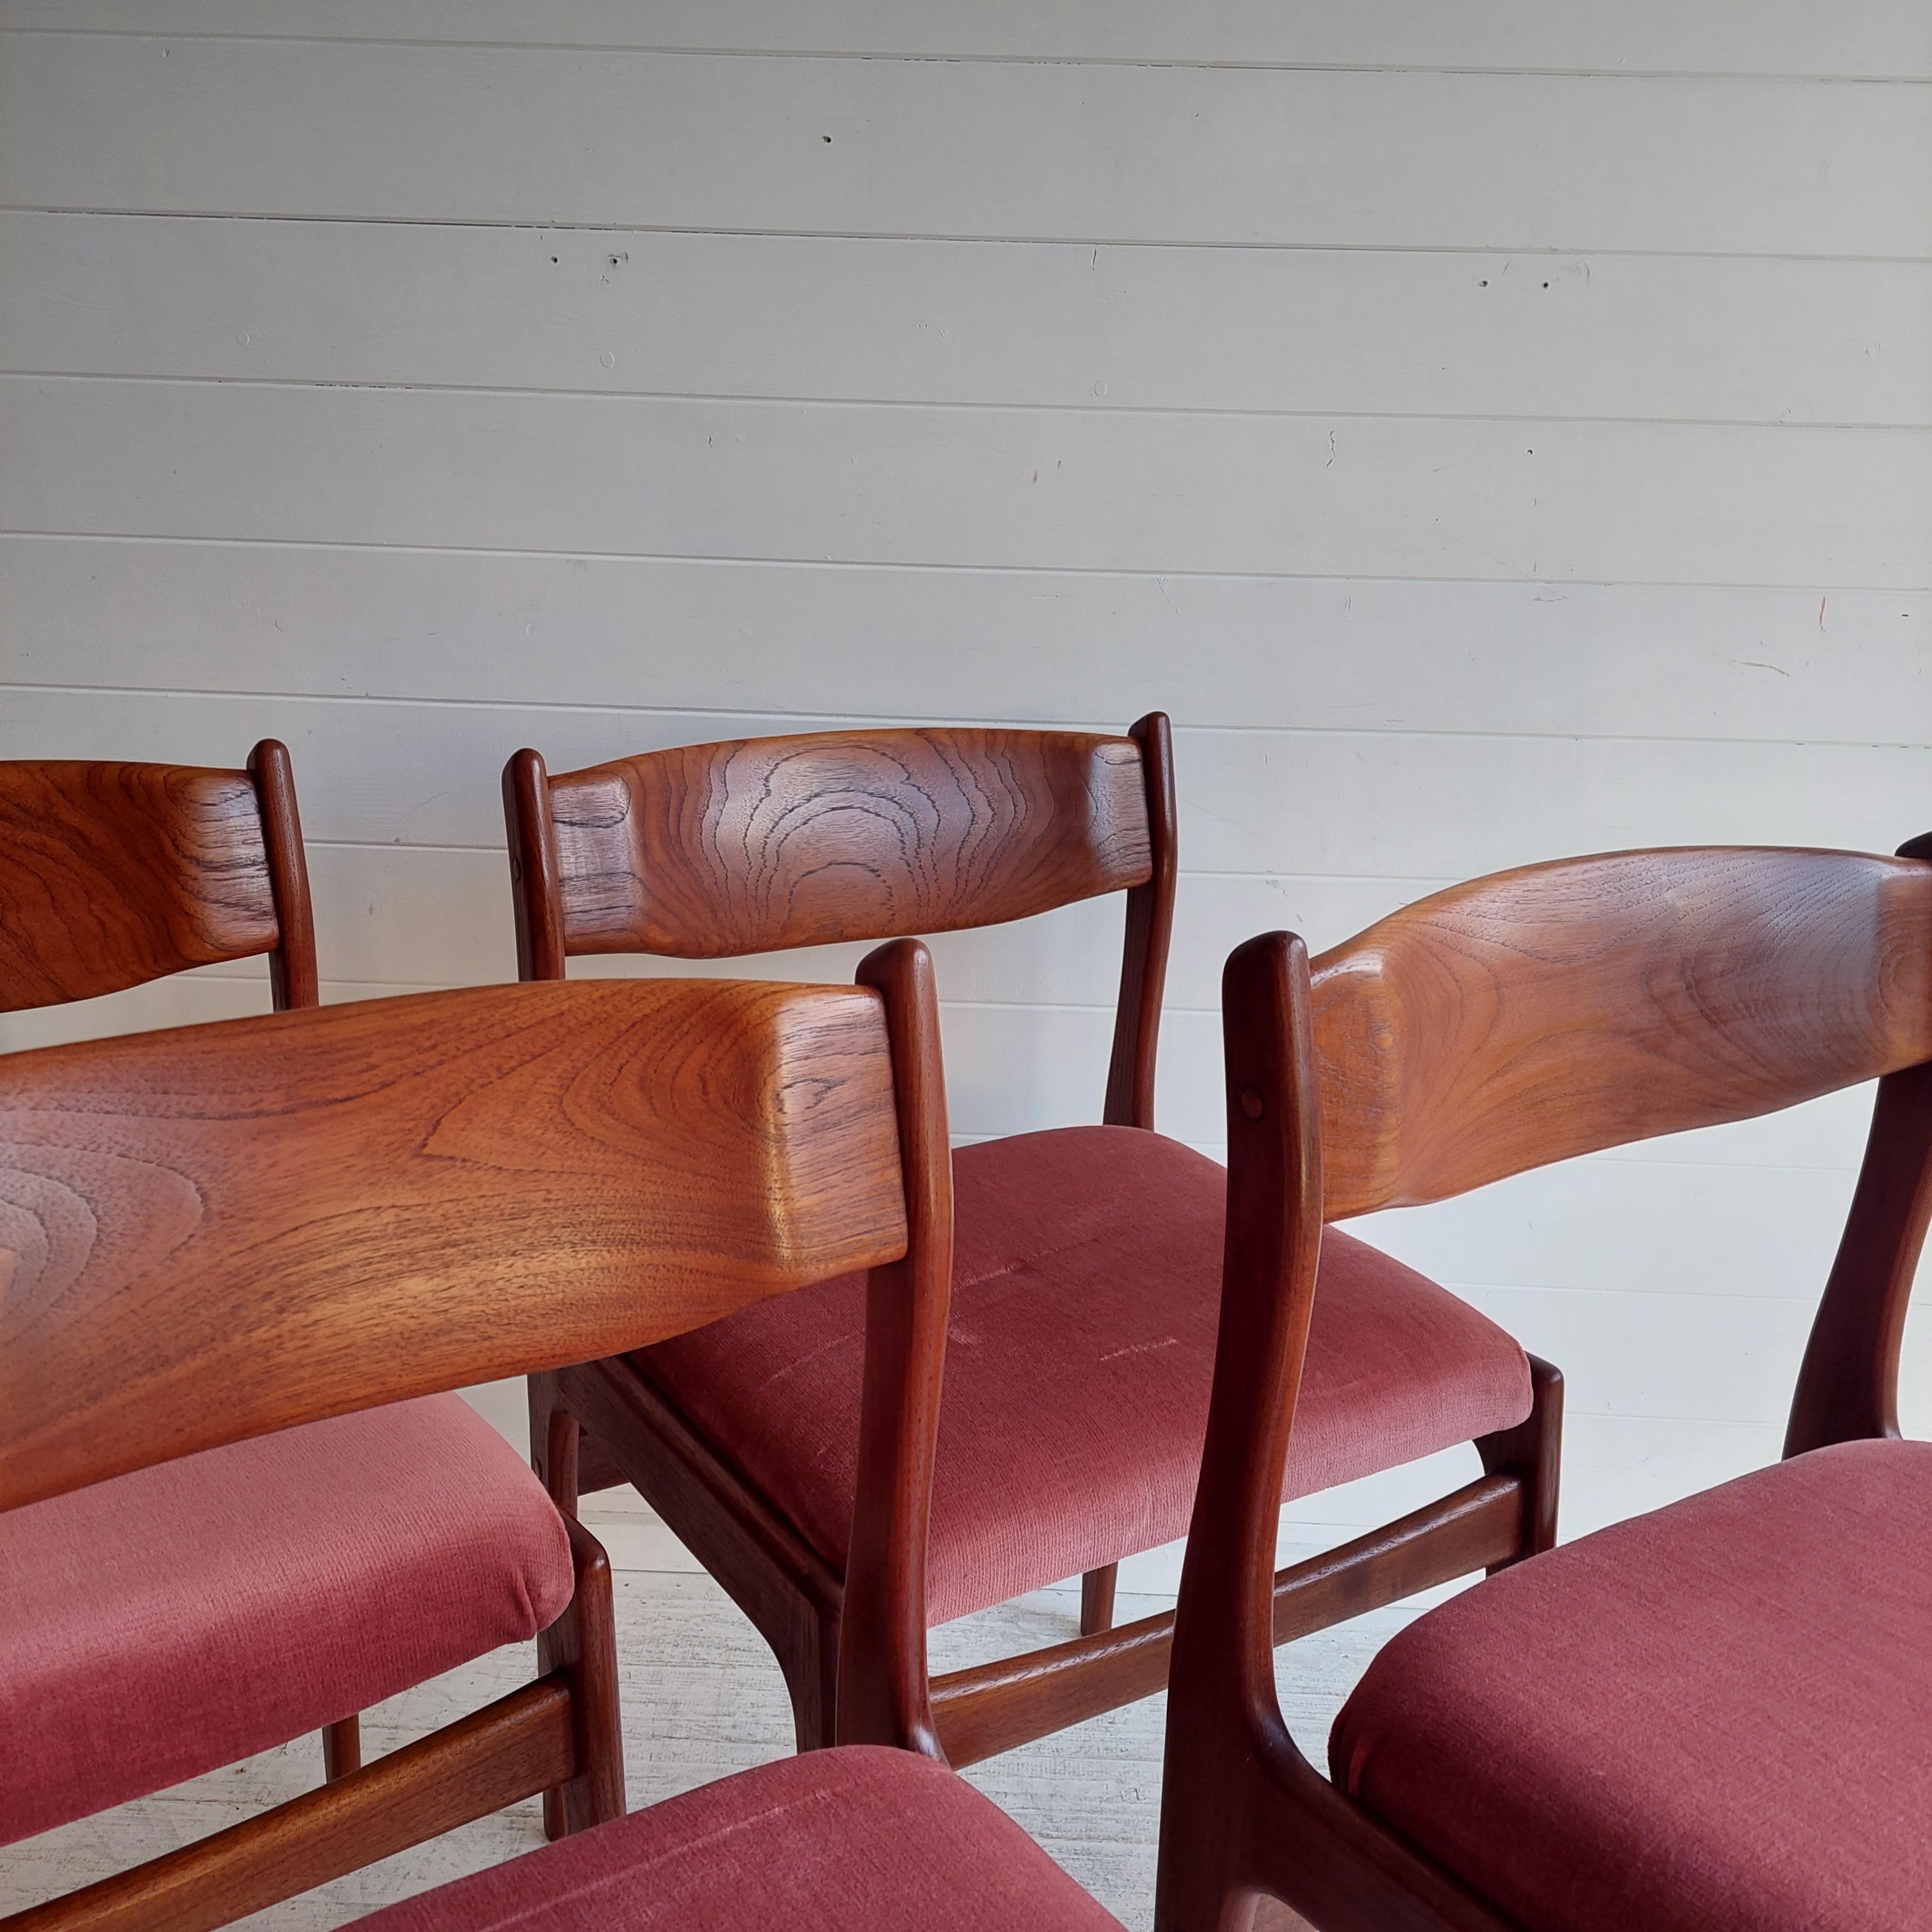 Indulge in the charm of mid-century Danish design with this set of 4 dining chairs
Erik Buch Style. 
These chairs were made in Denmark and date from around the early 1960s. 

Crafted from high-quality teak, these vintage retro chairs bring a touch